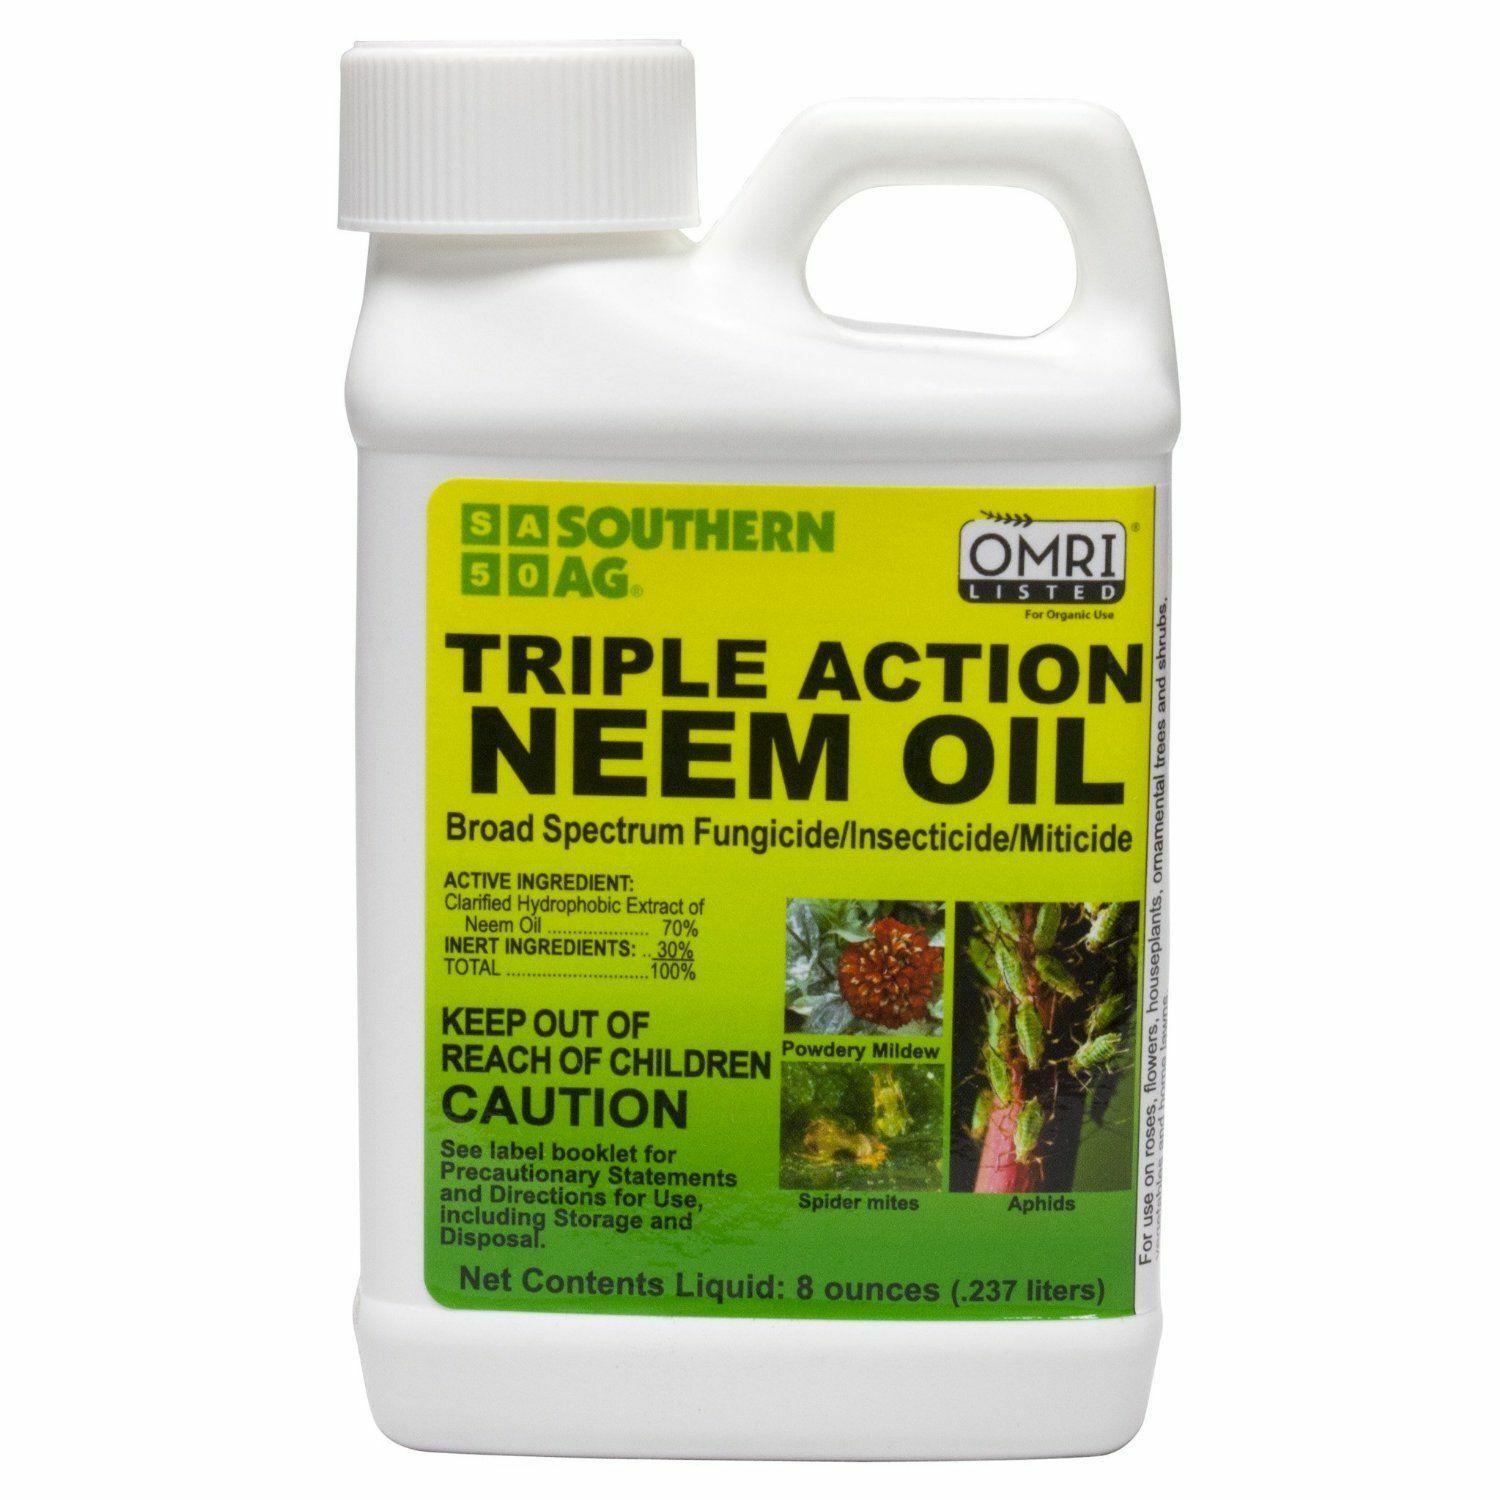 Southern Ag Triple Action Neem Oil 8 Oz. Organic Insecticide Fungicide Miticide